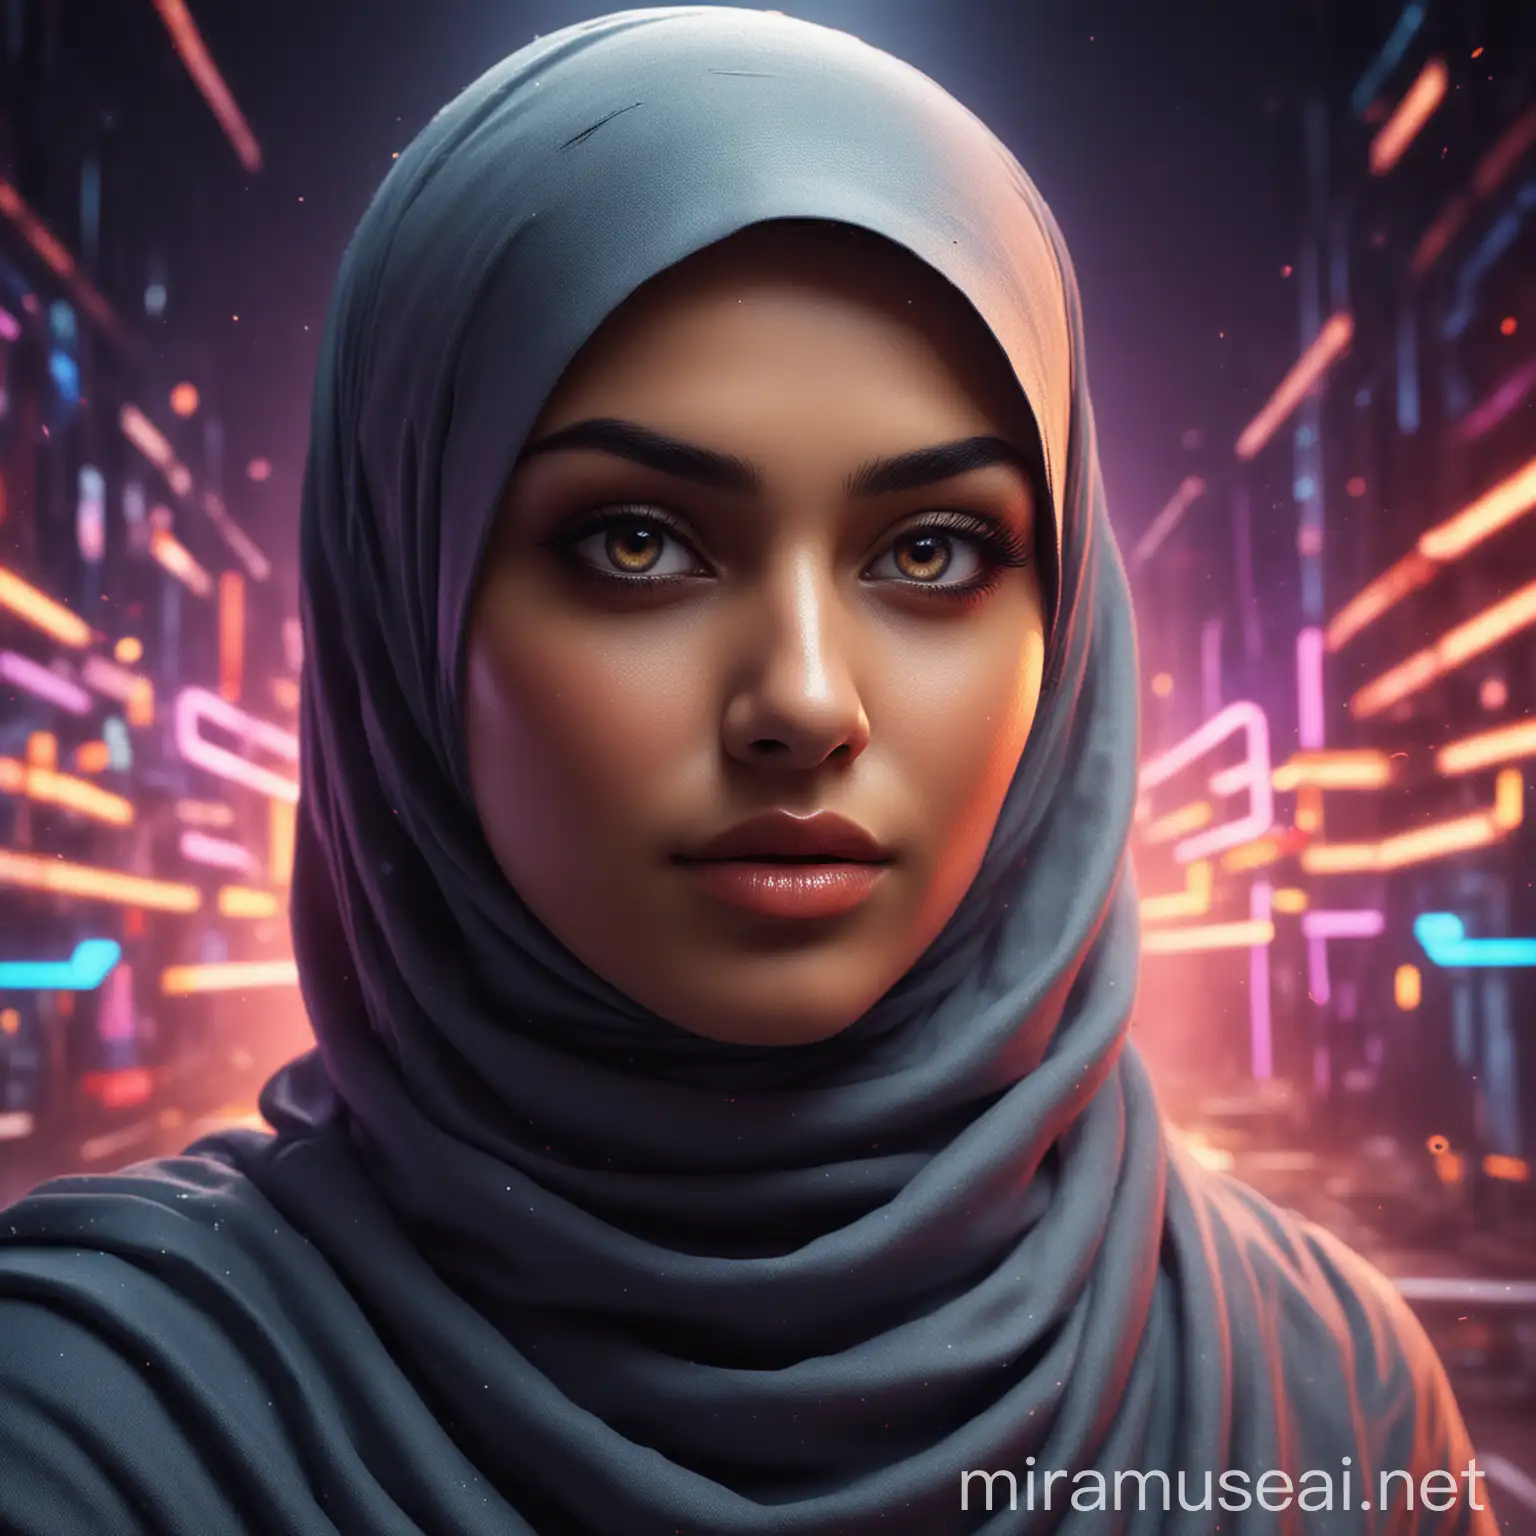 Create a hyper-realistic, 8K image of a woman wearing a hijab and niqab, ensuring only her eyes are visible. The image should capture intricate details, highlighting the texture and fabric of both the hijab,Illustrate an electrifying and dynamic scene where a bold and charismatic influencer is energetically gesturing towards a glowing, futuristic screen .Surround the scene with vibrant, eye-catching colors and pulsating energy effects to command attention. Use sharp, vivid colors to make the text and the influencer's gestures pop. The background should be a futuristic setting with sleek, modern elements, adding to the sense of excitement and anticipation, Model: High-Energy and Futuristic IllustrationsType: Dynamic, vibrant illustration with bold and eye-catching elementsColor Palette: Vibrant, neon tones with sharp contrastsLighting: Bright, futuristic lighting with glowing effectsBackground: A futuristic setting with sleek, modern elementsDetails: Hyperrealistic quality with dynamic poses, expressive facial features, and futuristic elements like holographic displays and glowing technology.